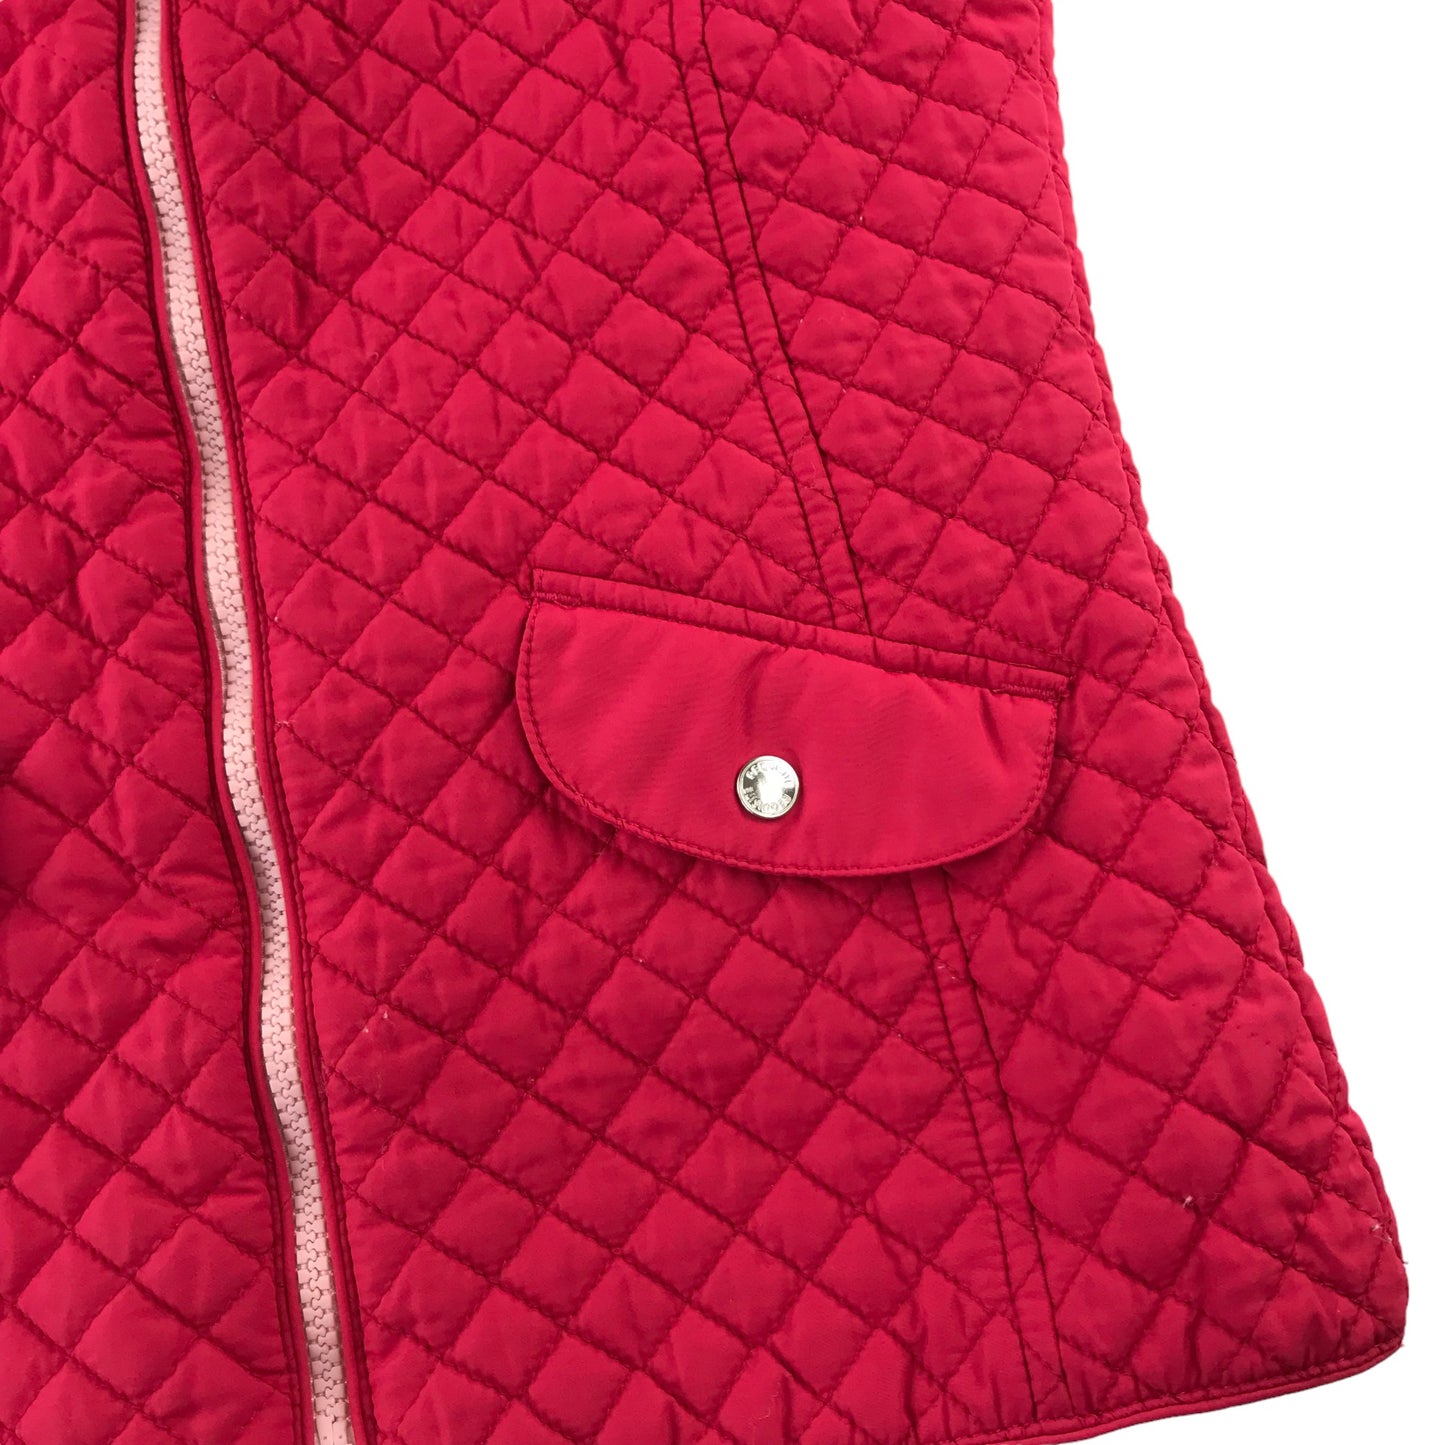 Requisite England gilet 11-12 years pink quilted lightly padded